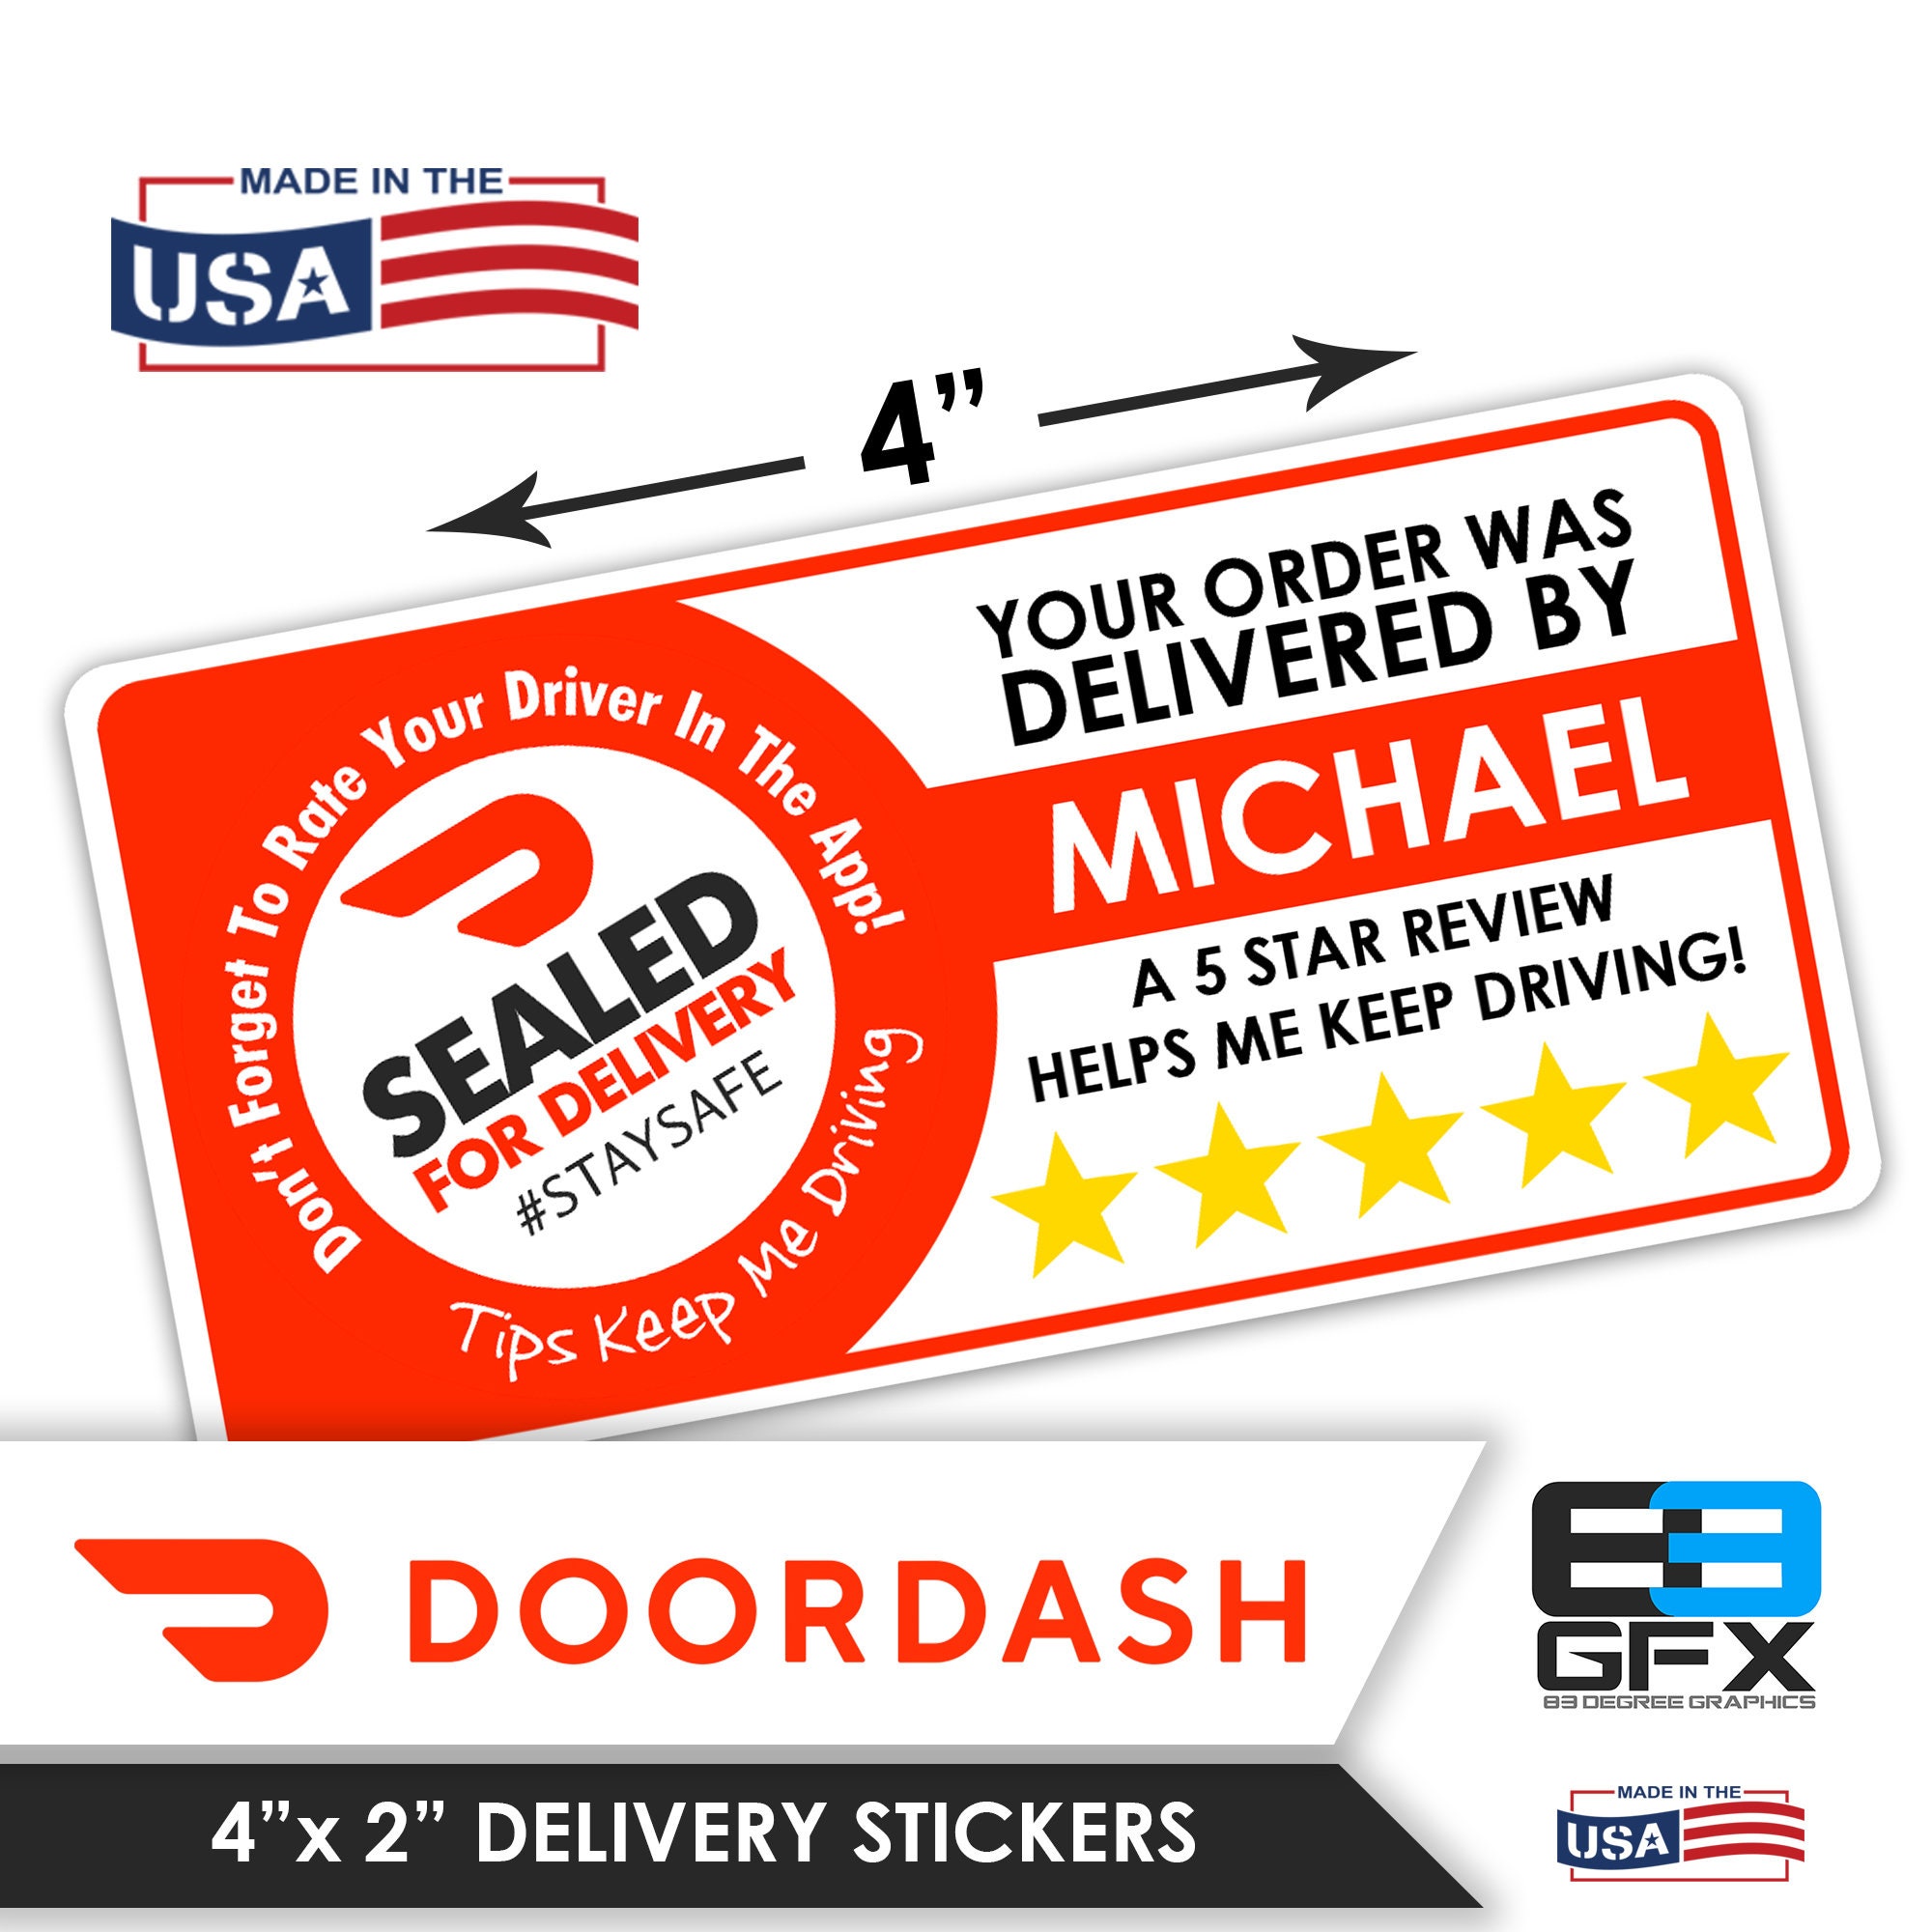 4"x2" Doordash Themed Shopper Bag Stickers SEALED - Missing Items